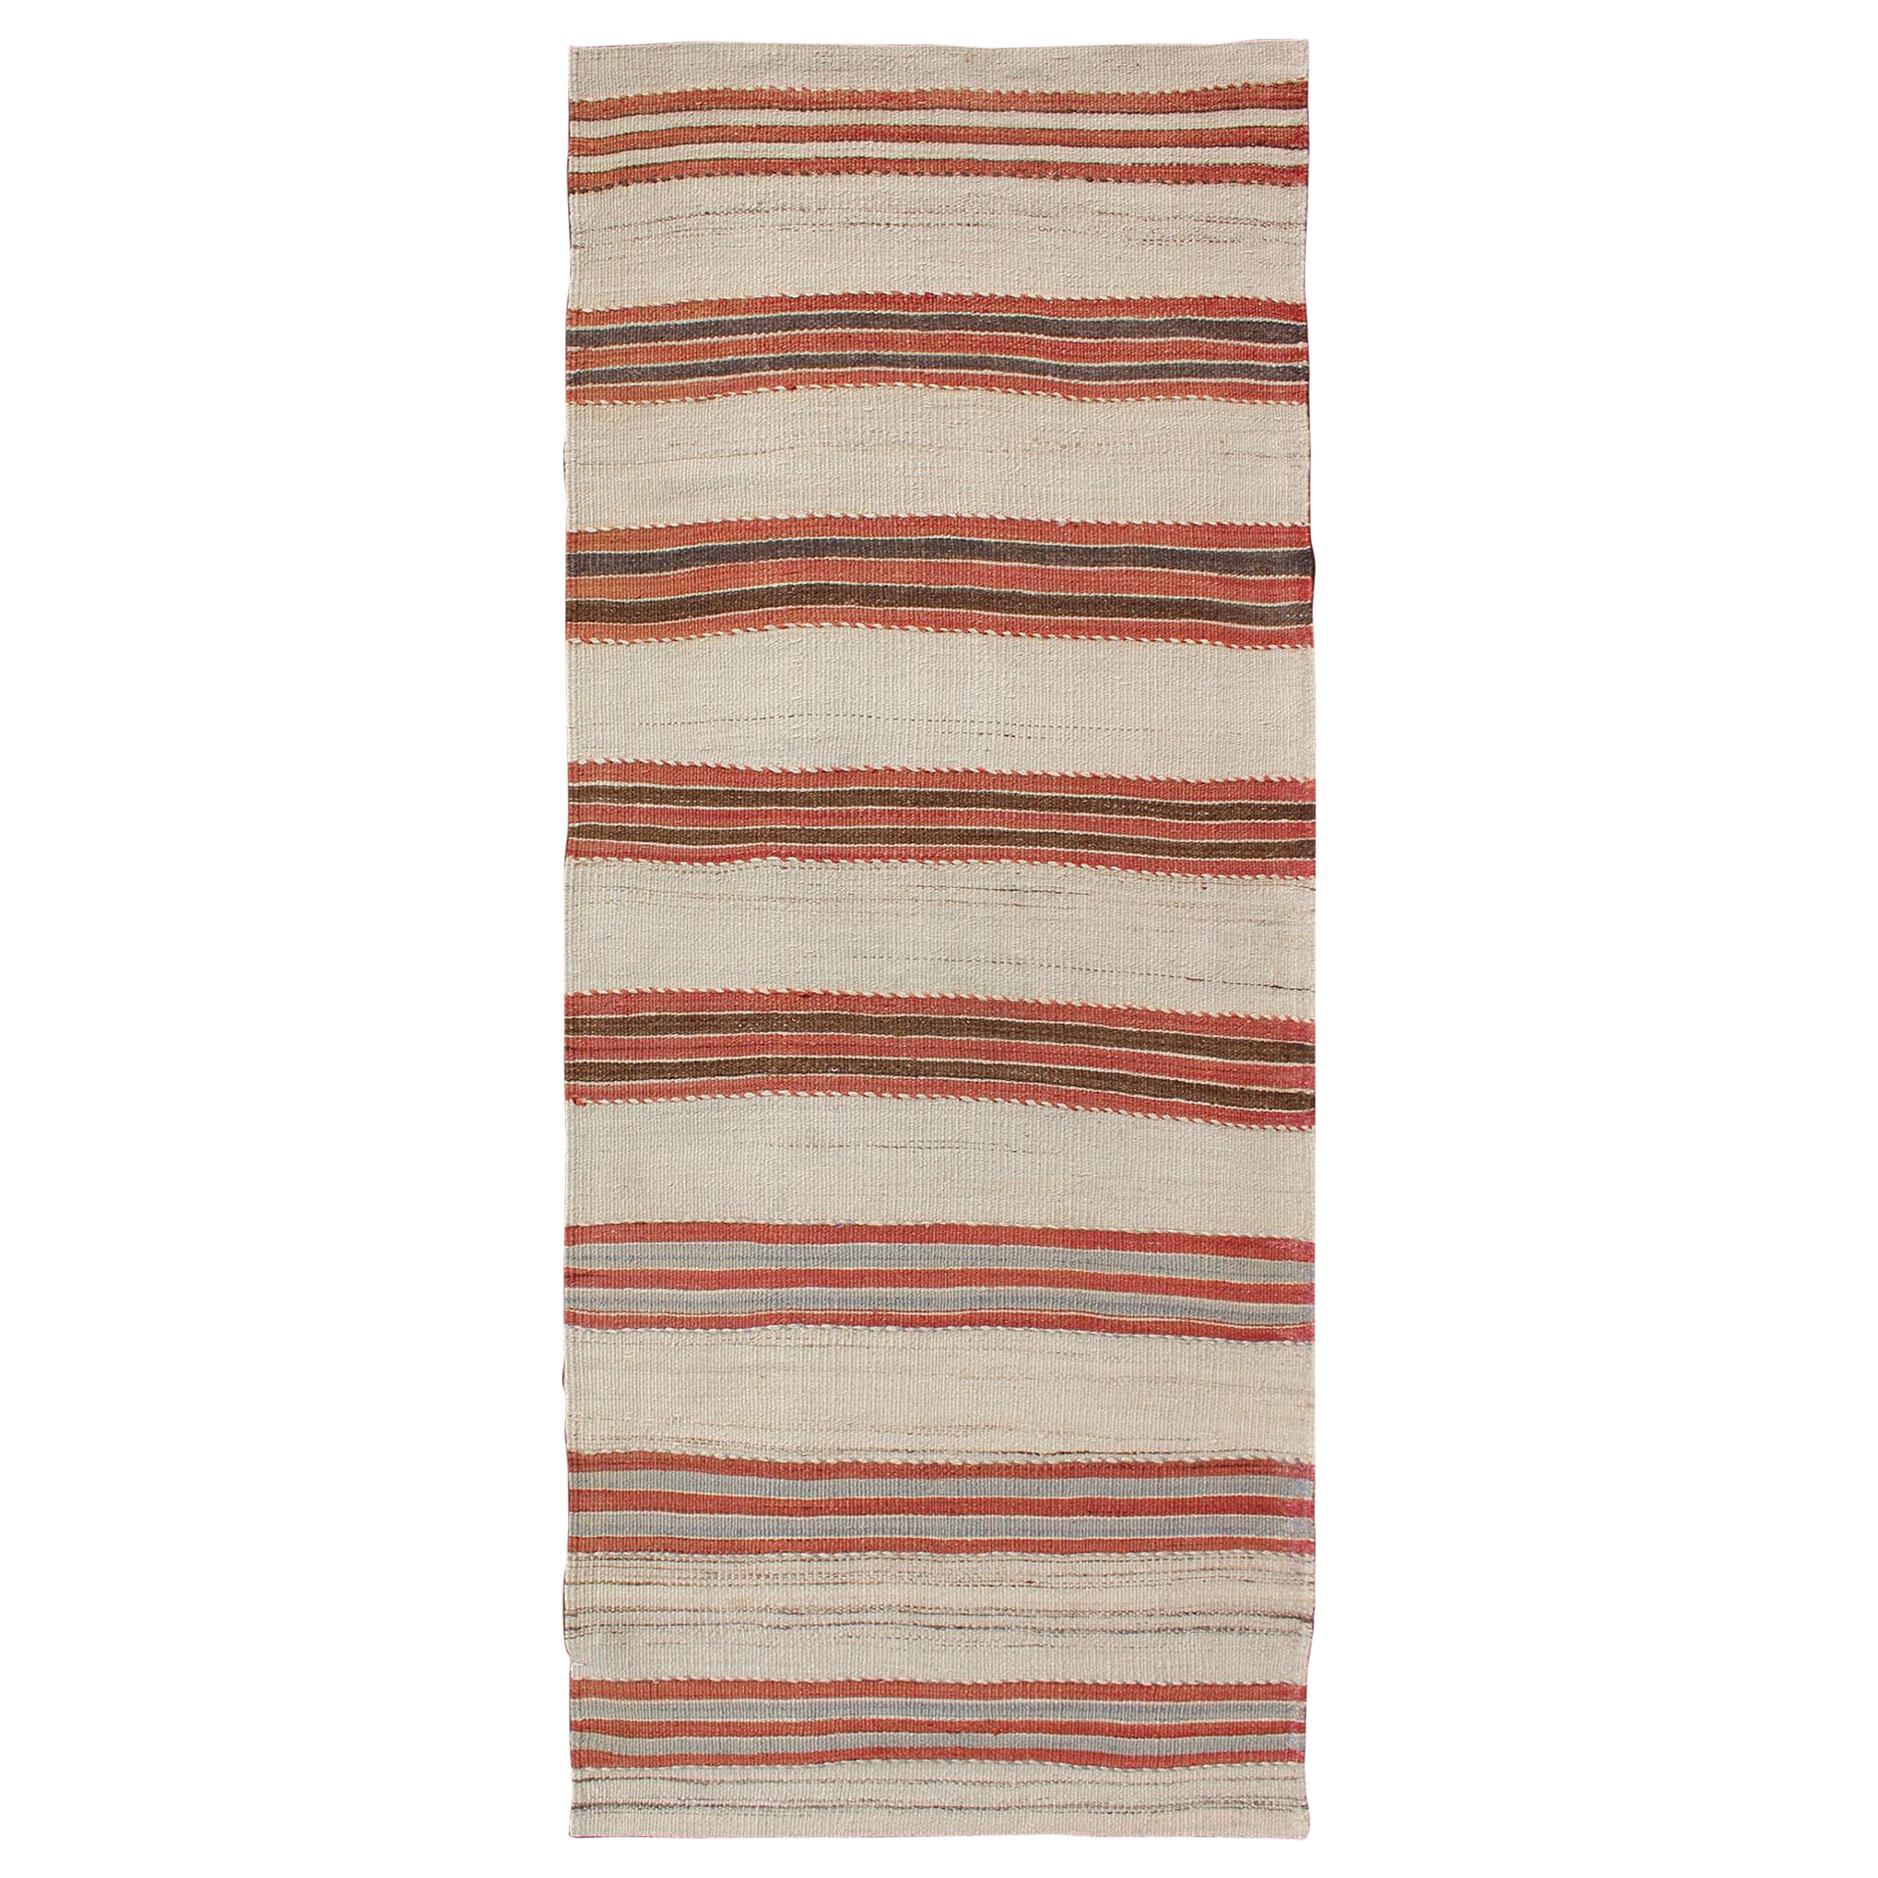 Striped Turkish Vintage Kilim Flat-Weave Rug in Shades of Red, Brown, and Ivory